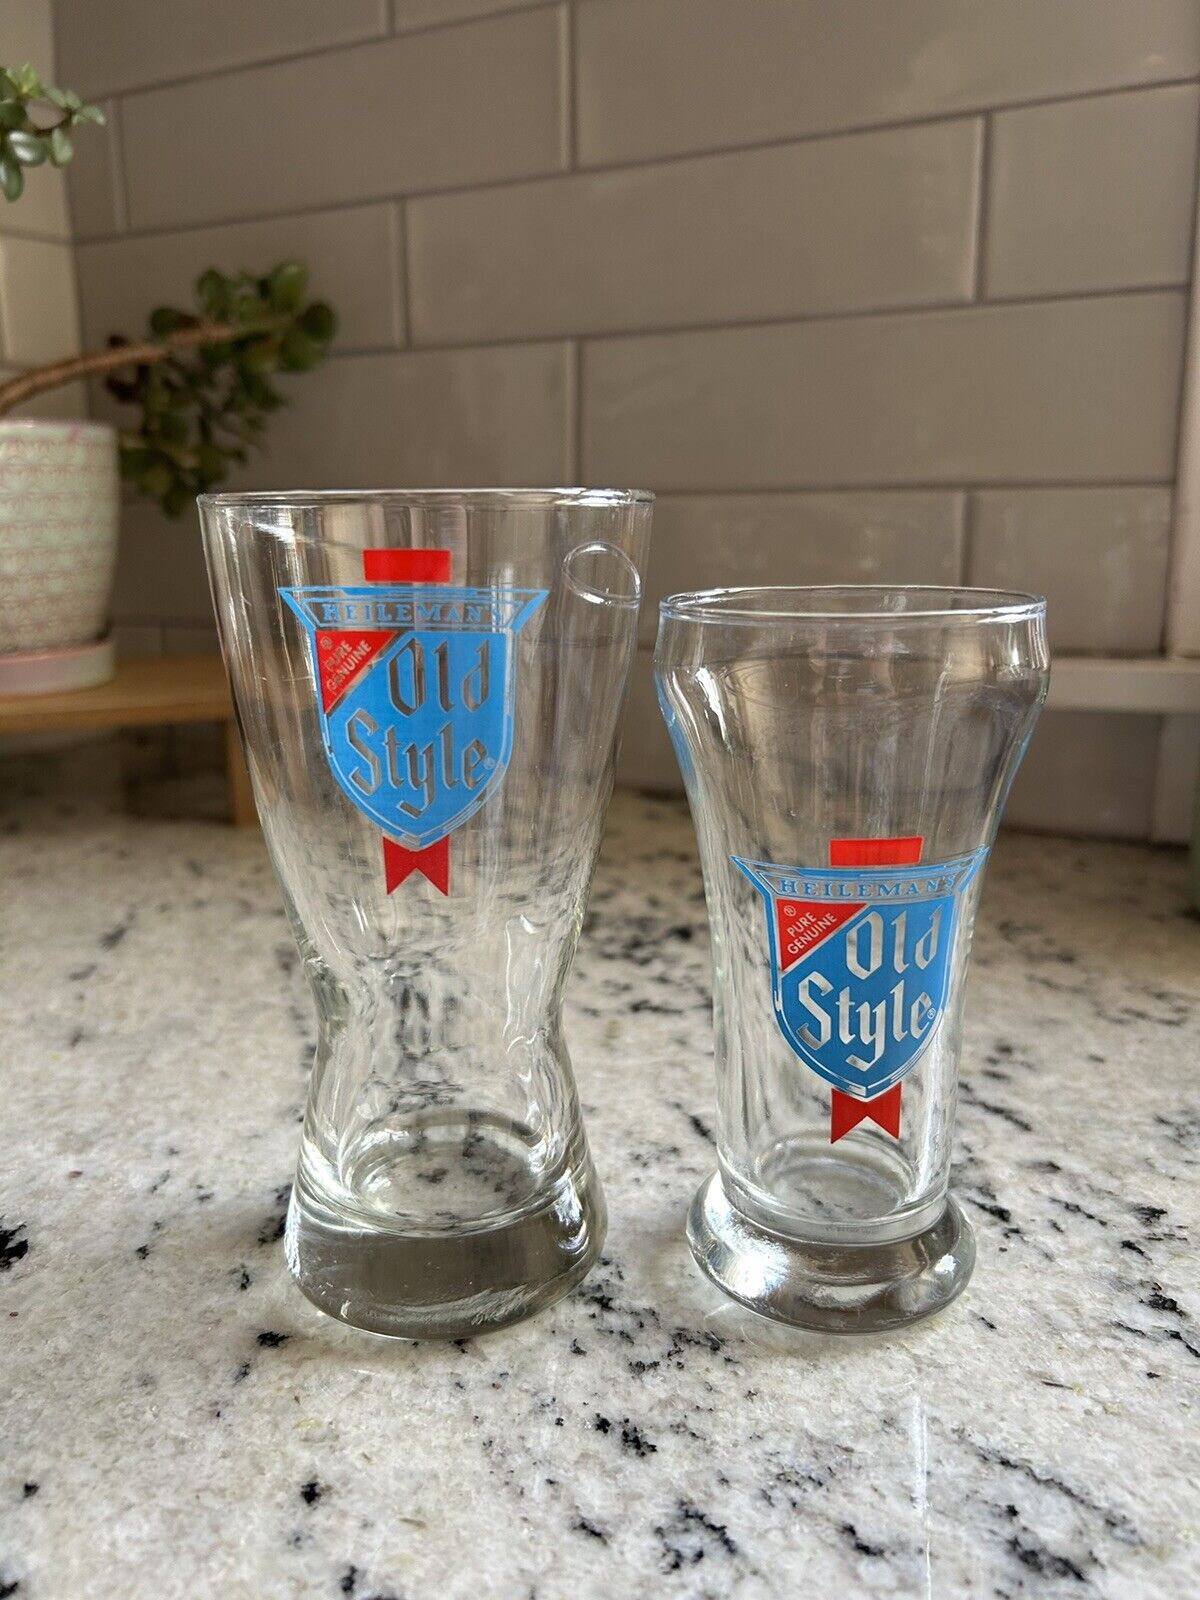 VINTAGE HEILEMAN\'S OLD STYLE BEER PILSNER STYLE GLASS 8 OUNCES & 6 OUNCES 2 Pair